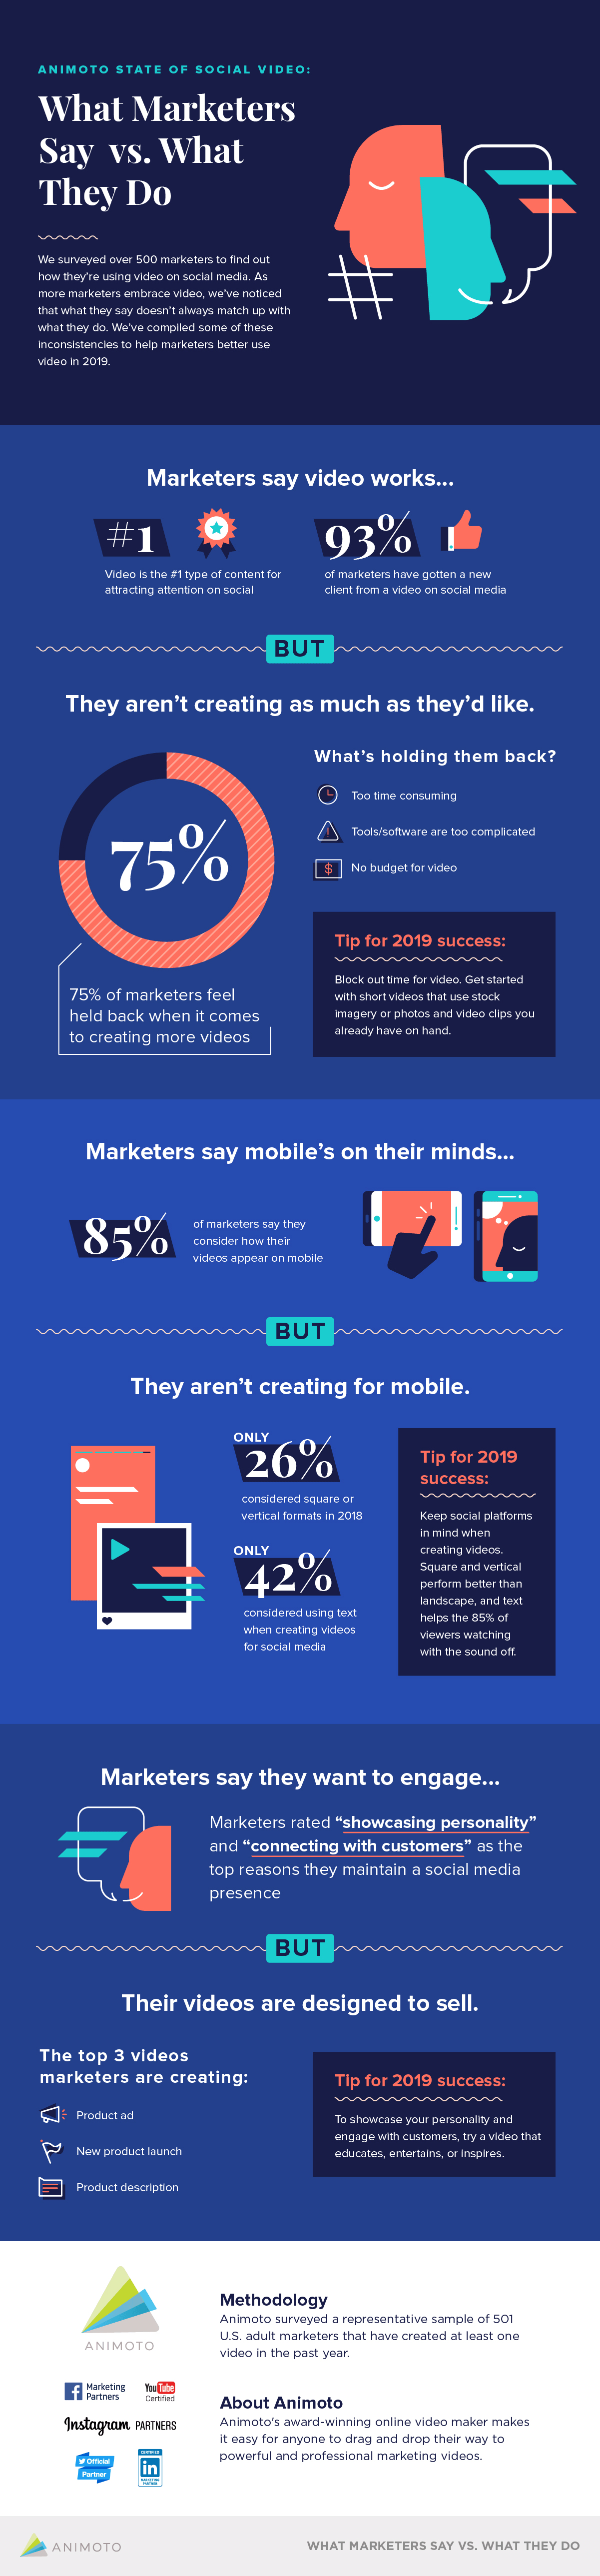 What Marketers Say VS What They Do